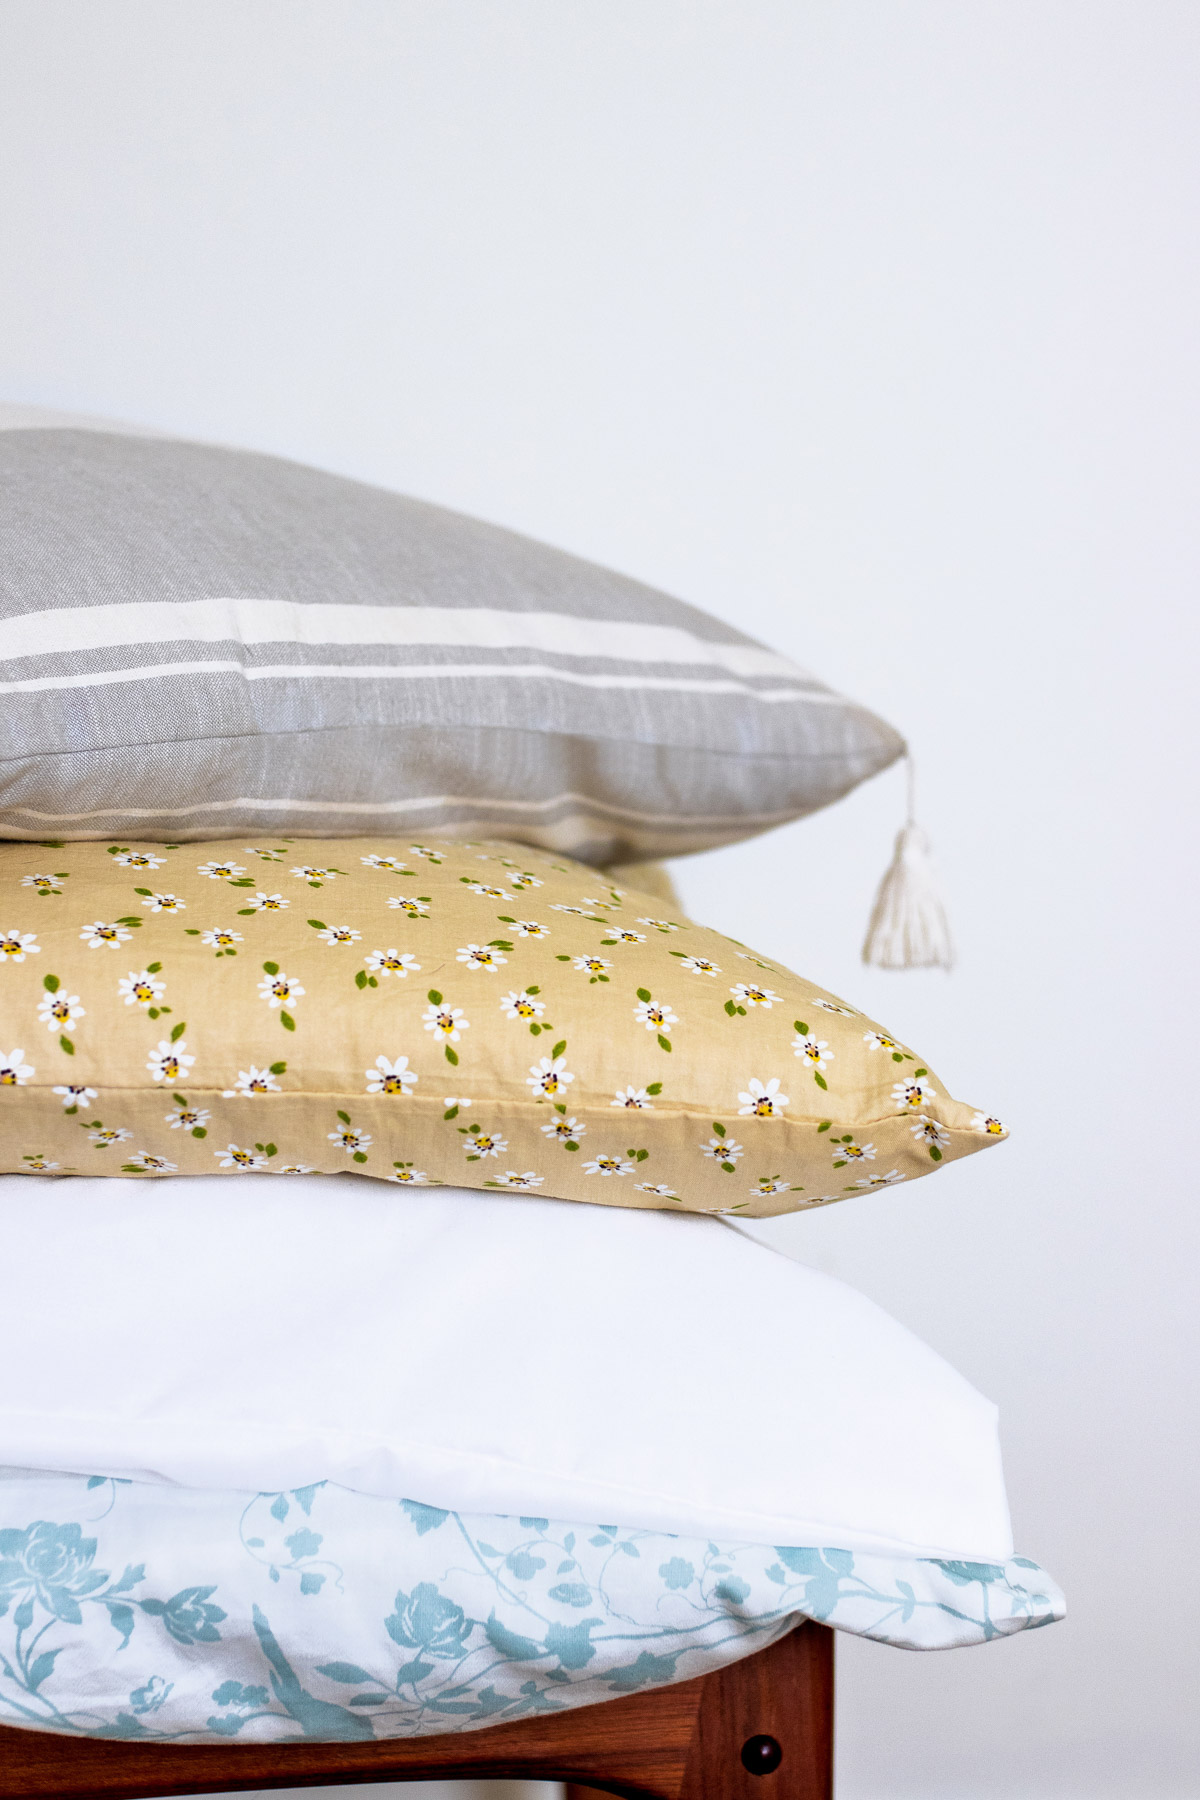 Learn how to wash your pillows & why they need it